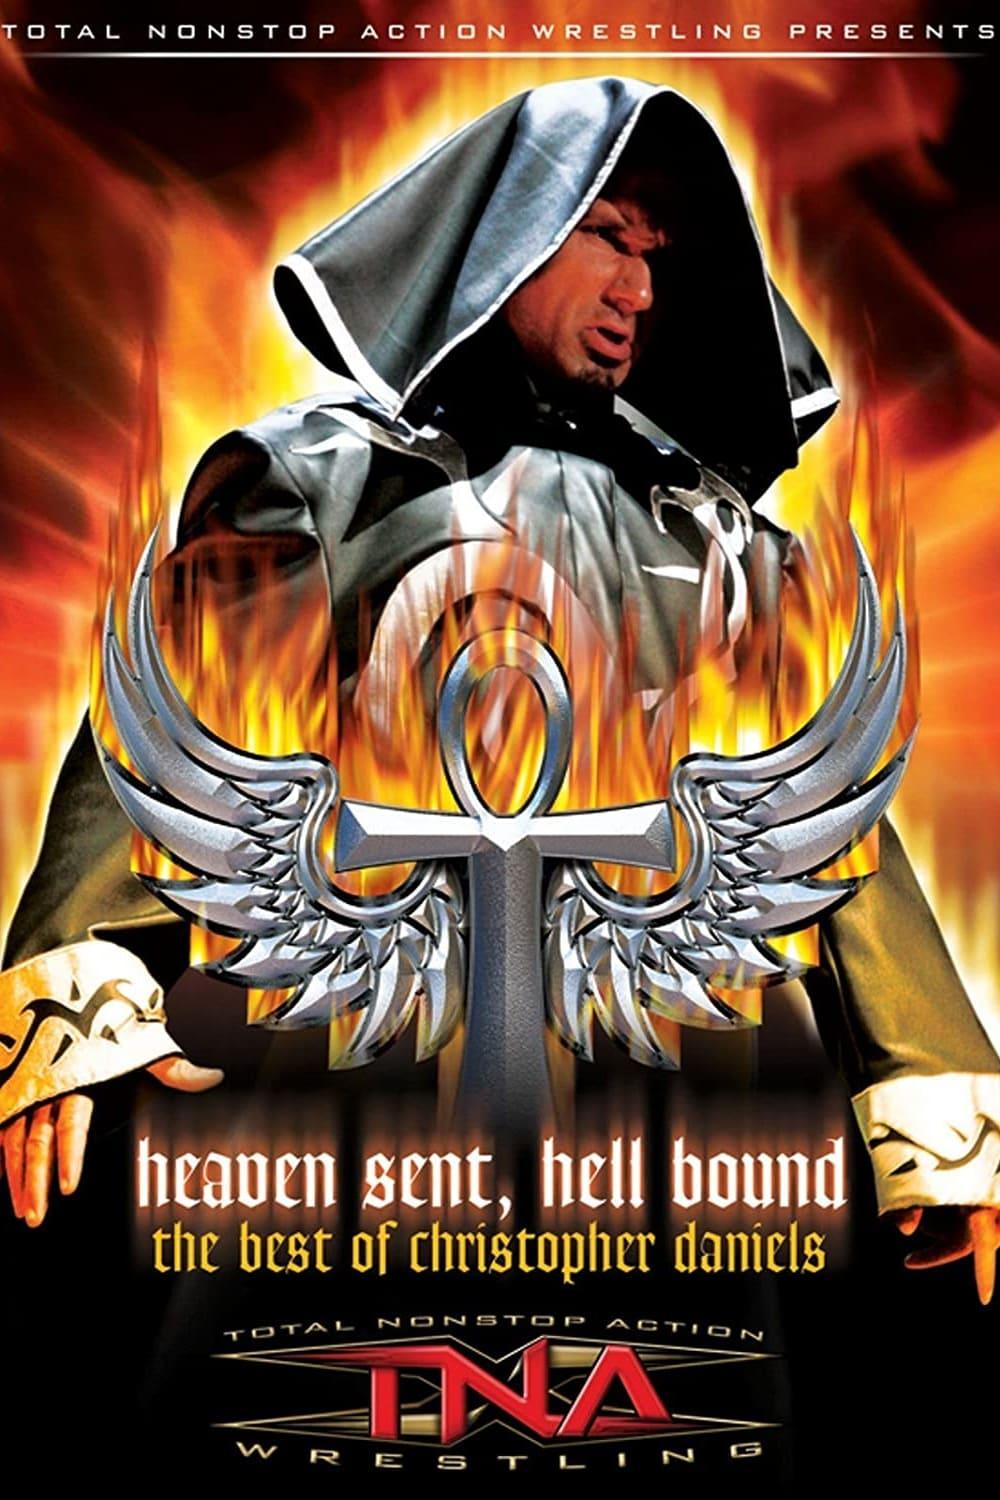 The Best of Christopher Daniels: Heaven Sent, Hell Bound poster